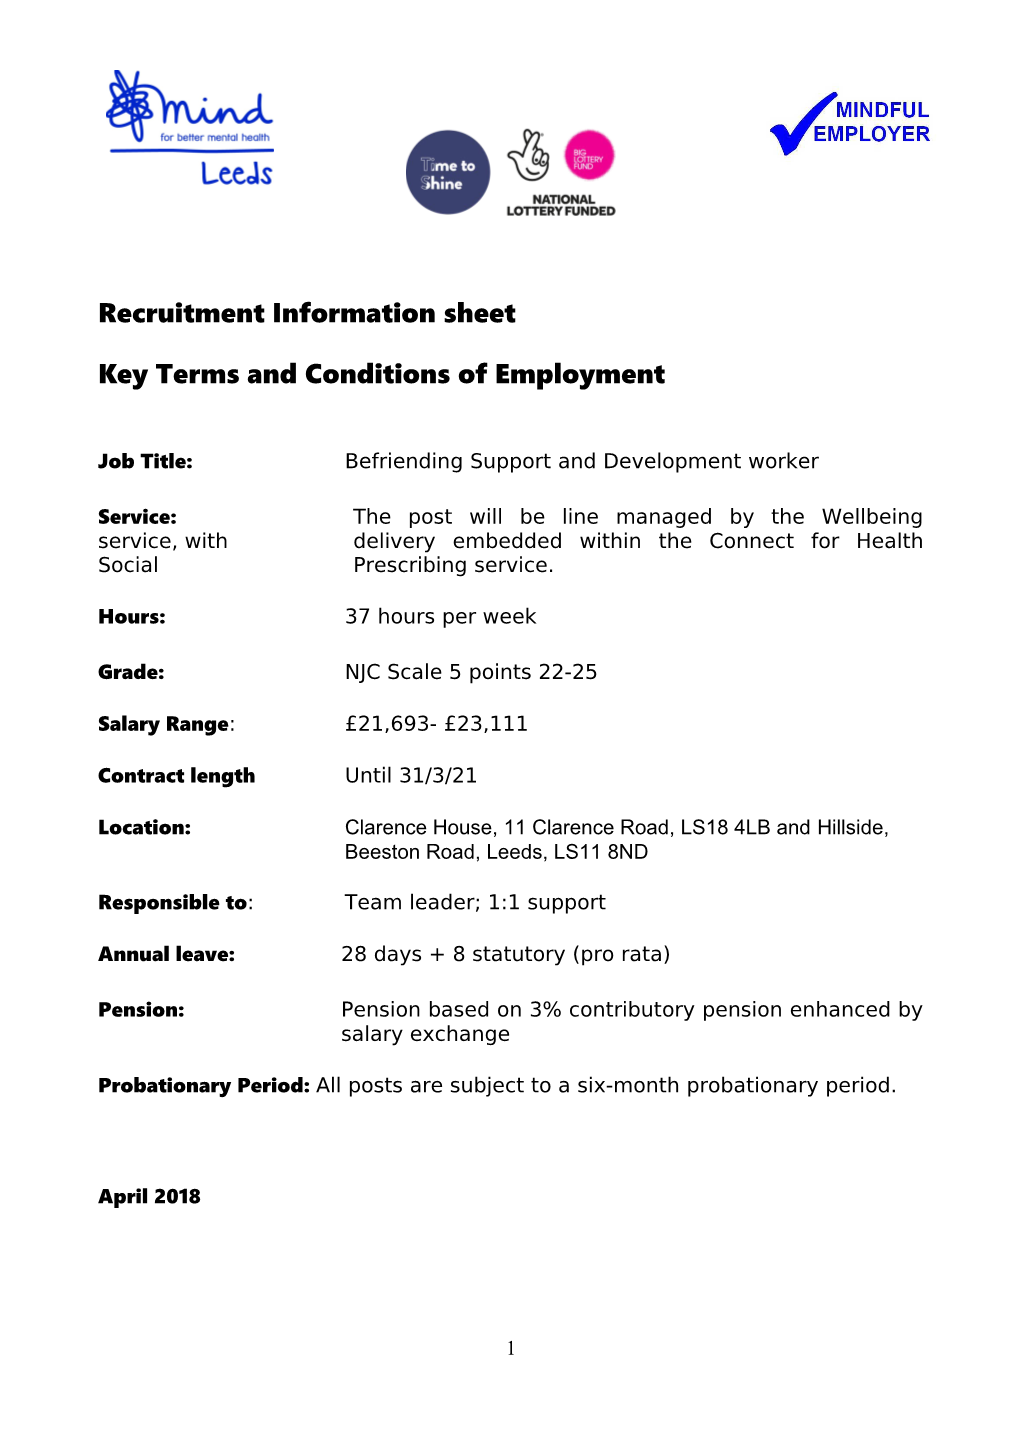 Key Terms and Conditions of Employment